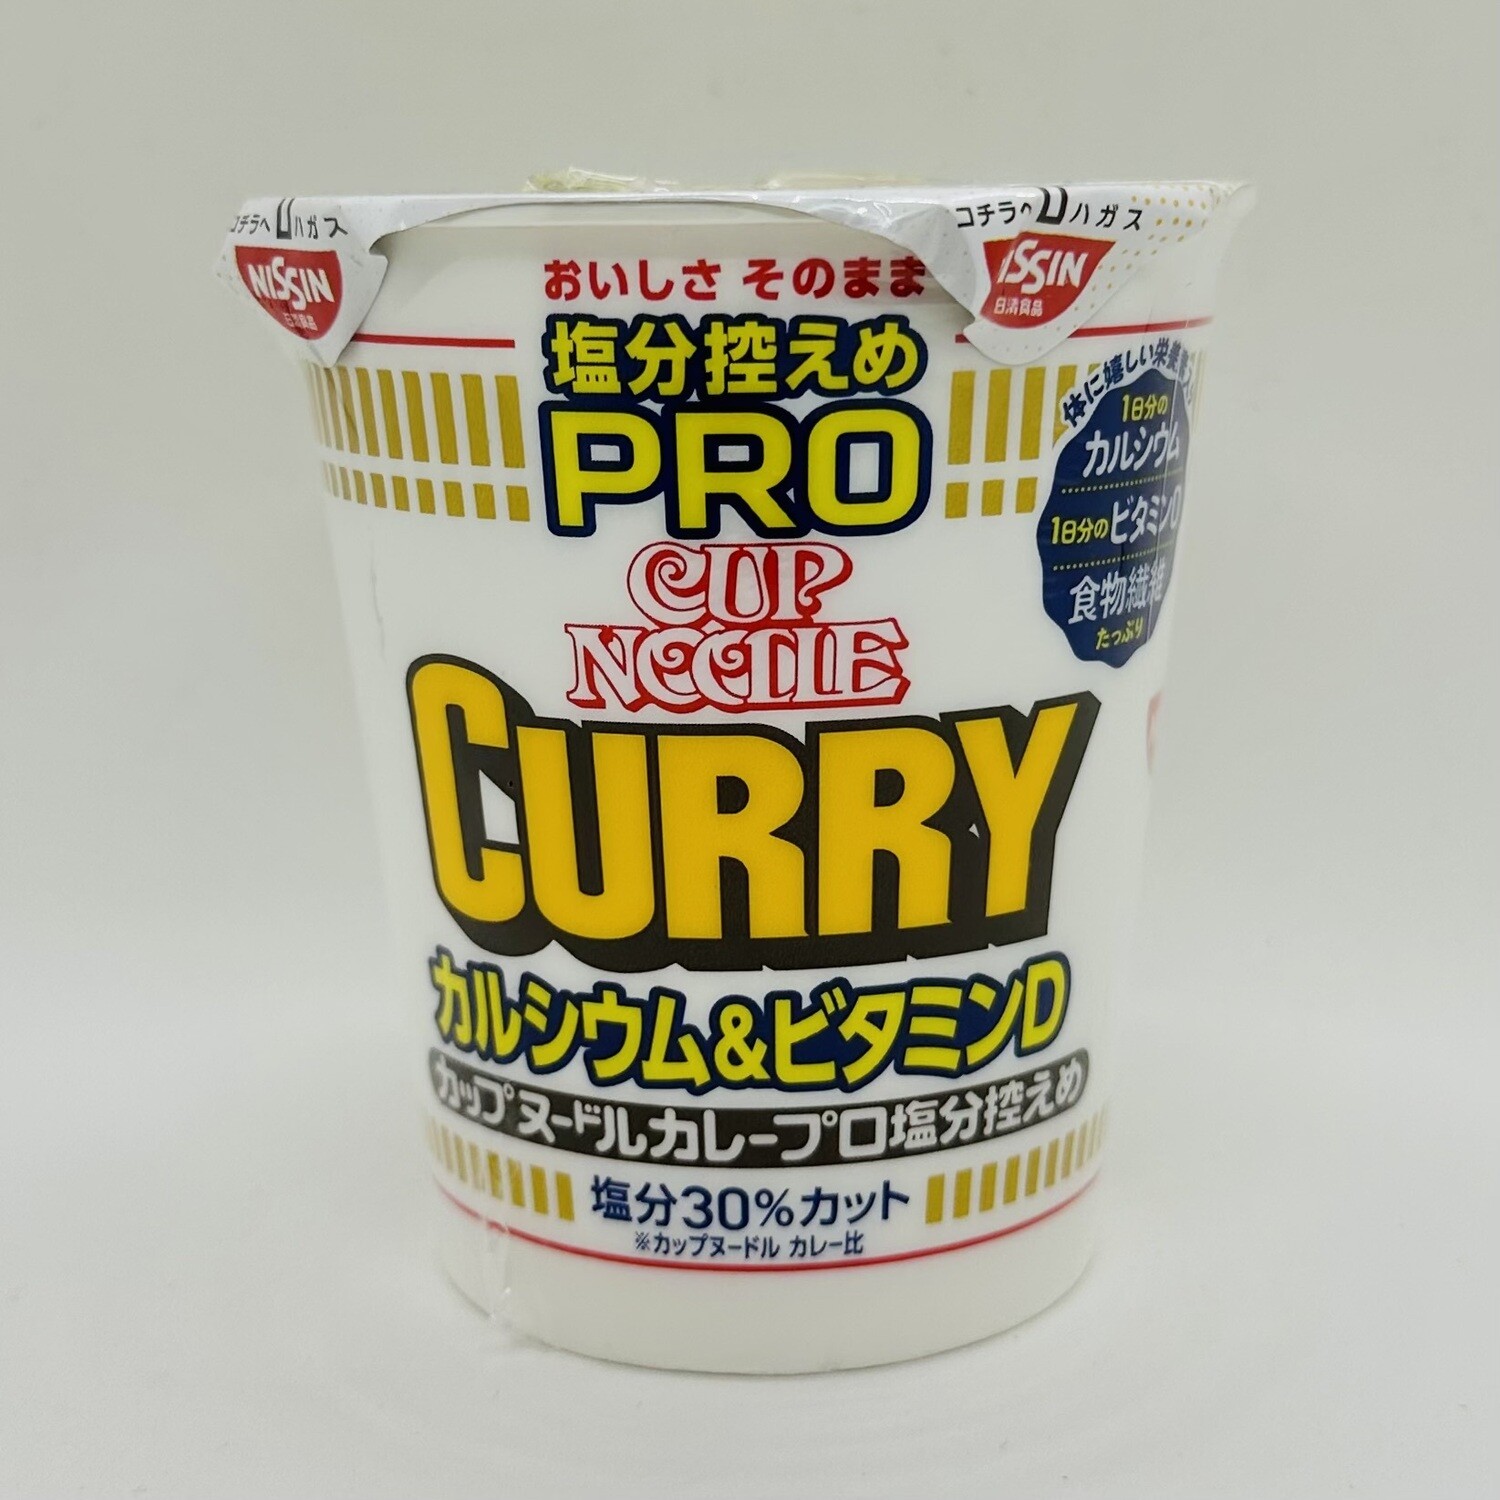 Nissin Cup Noodle Curry Pro